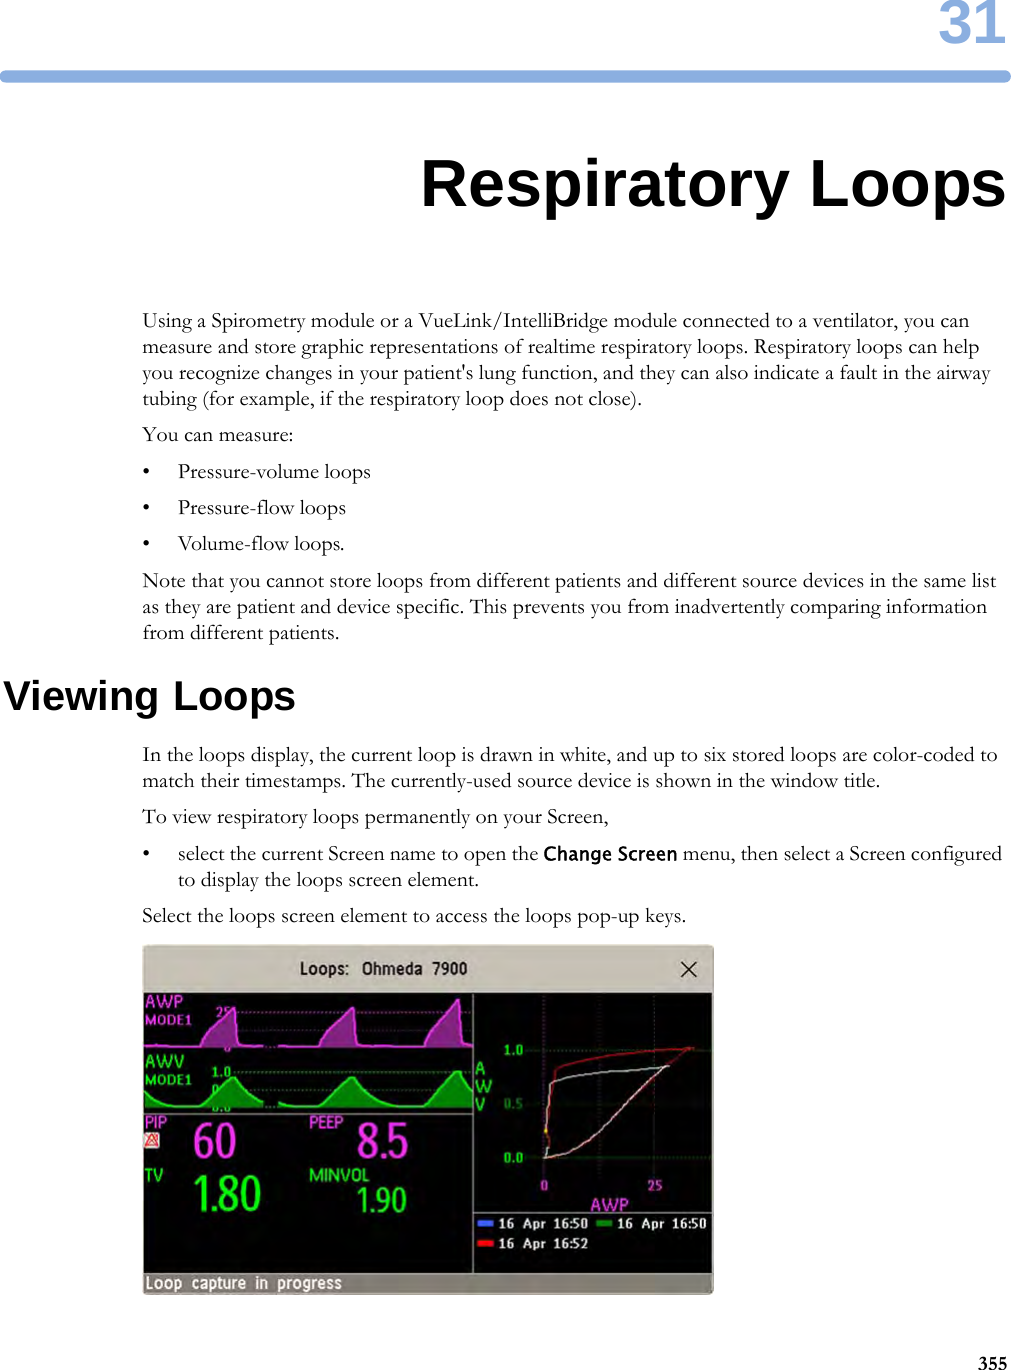 3135531Respiratory LoopsUsing a Spirometry module or a VueLink/IntelliBridge module connected to a ventilator, you can measure and store graphic representations of realtime respiratory loops. Respiratory loops can help you recognize changes in your patient&apos;s lung function, and they can also indicate a fault in the airway tubing (for example, if the respiratory loop does not close).You can measure:• Pressure-volume loops• Pressure-flow loops•Volume-flow loops.Note that you cannot store loops from different patients and different source devices in the same list as they are patient and device specific. This prevents you from inadvertently comparing information from different patients.Viewing LoopsIn the loops display, the current loop is drawn in white, and up to six stored loops are color-coded to match their timestamps. The currently-used source device is shown in the window title.To view respiratory loops permanently on your Screen,• select the current Screen name to open the Change Screen menu, then select a Screen configured to display the loops screen element.Select the loops screen element to access the loops pop-up keys.